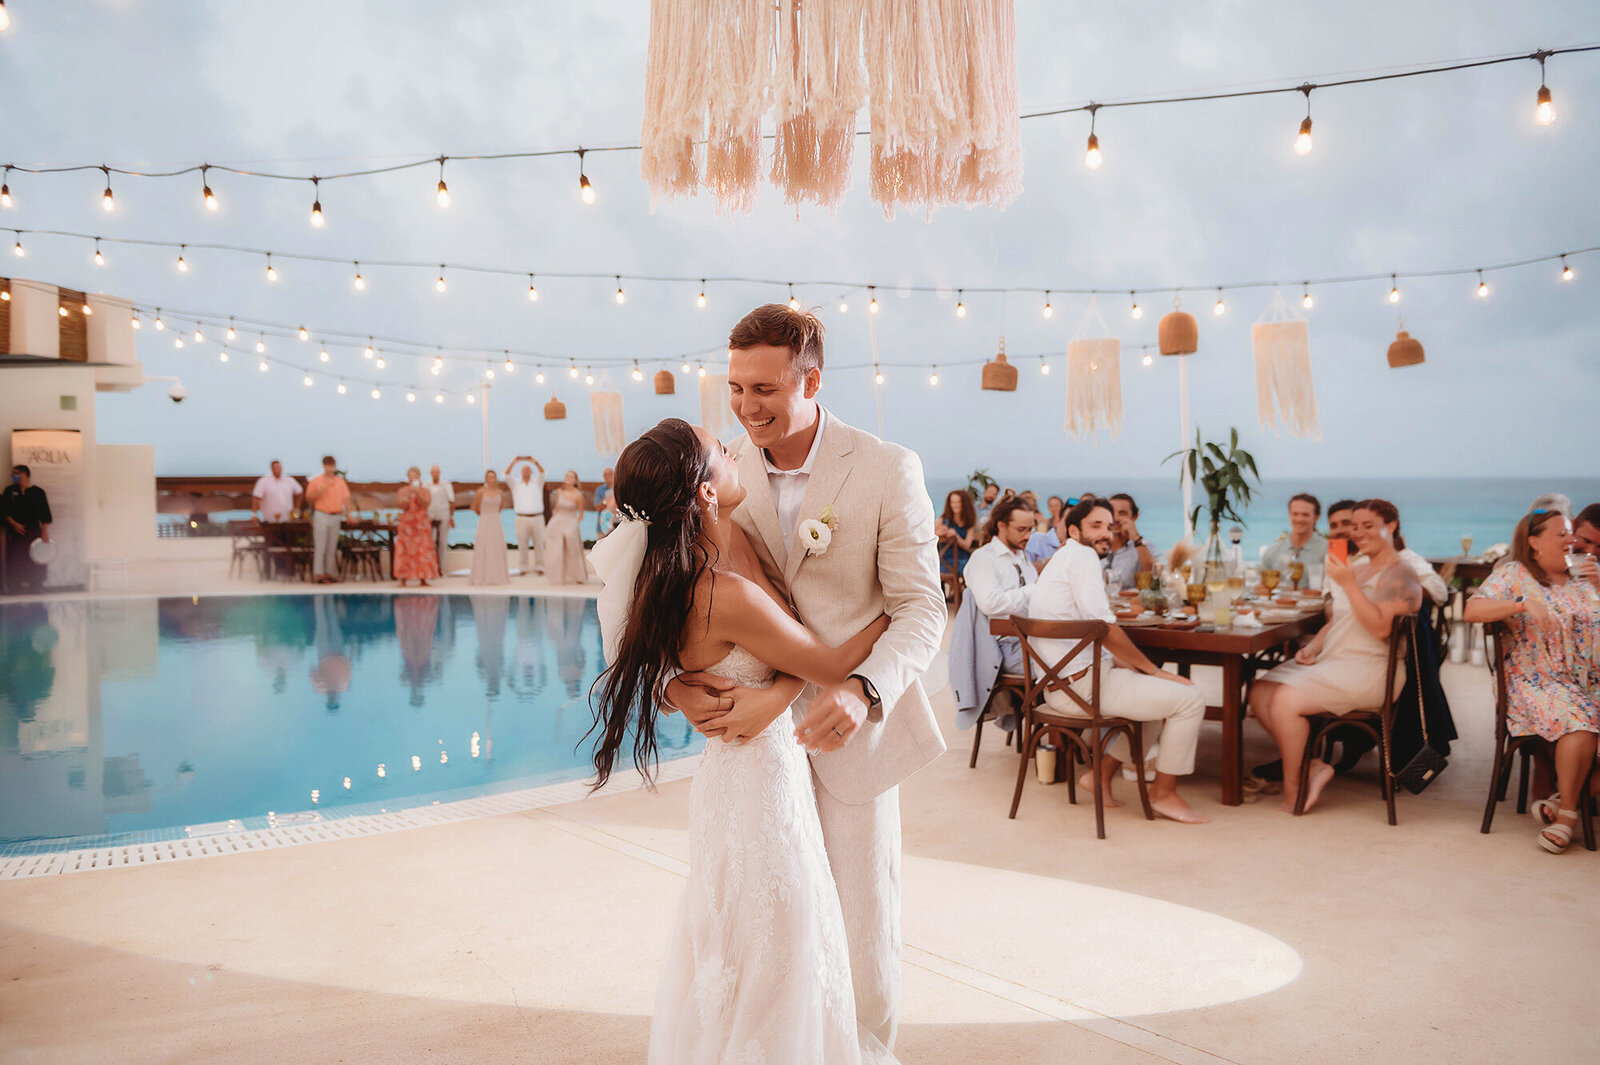 Newlyweds dance during their Micro-Wedding Reception at Live Aqua Resort in Cancun, Mexico.